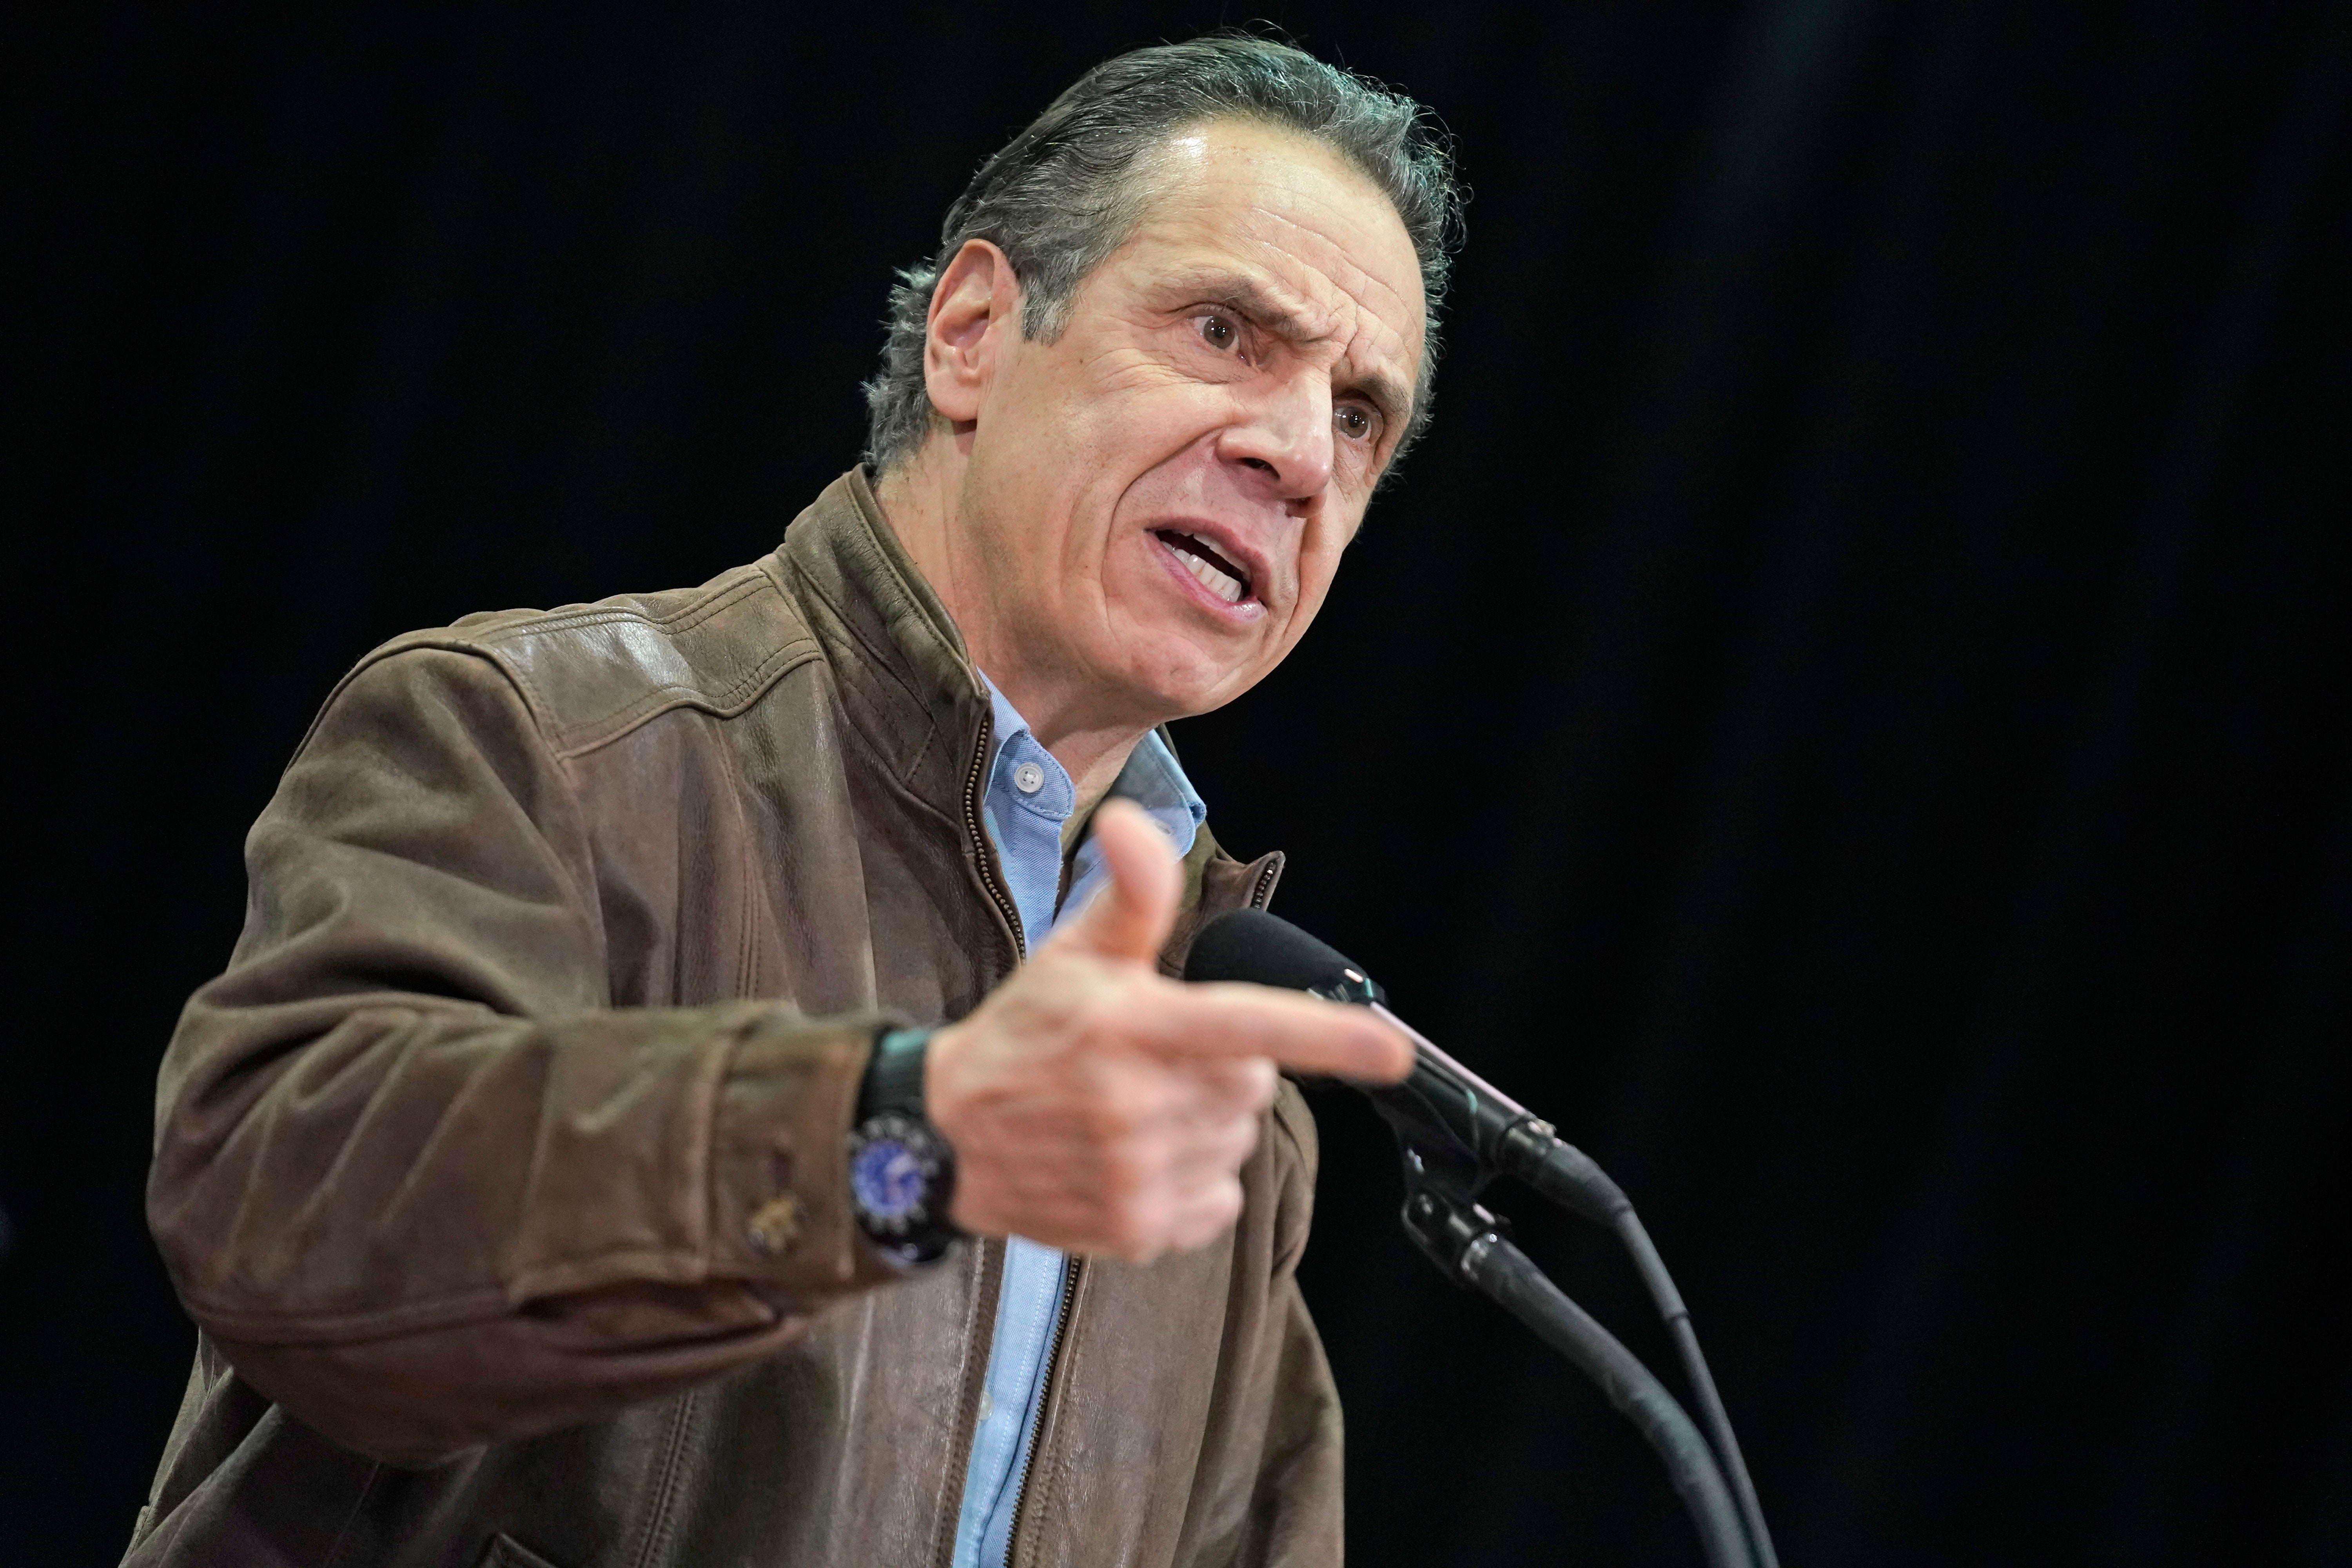 New York Governor Andrew Cuomo speaks during a press conference before the opening of a mass Covid-19 vaccination site in the Queens borough of New York, on 24 February, 2021. The governor is facing accusations of sexual harassment from two former aides.